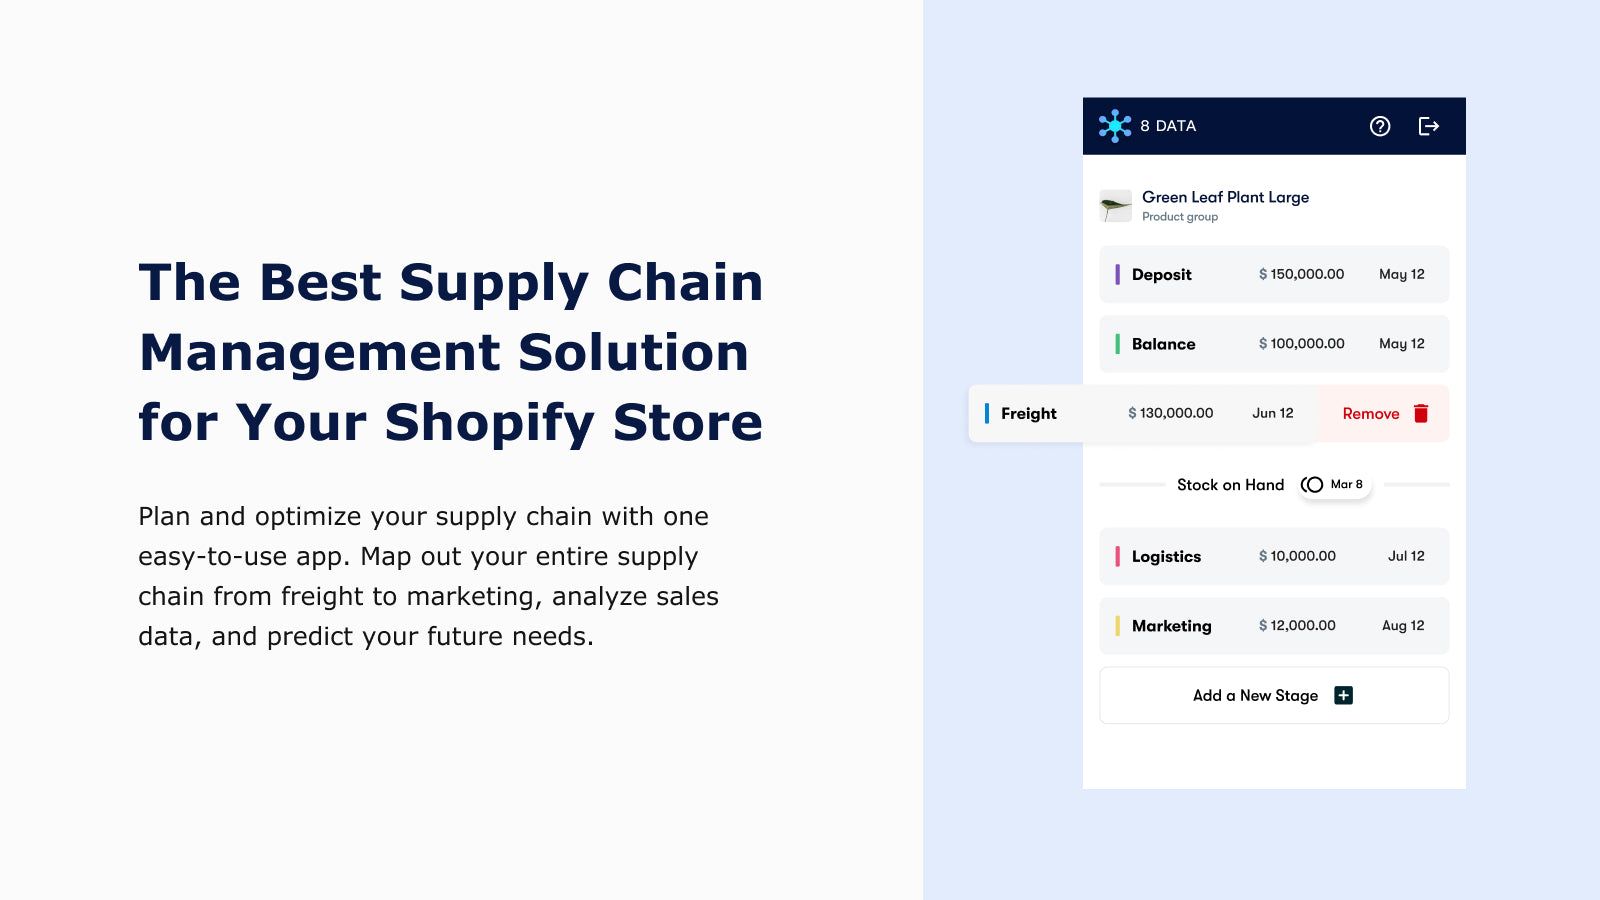 The Best Supply Chain Management Solution for Your eComm Store